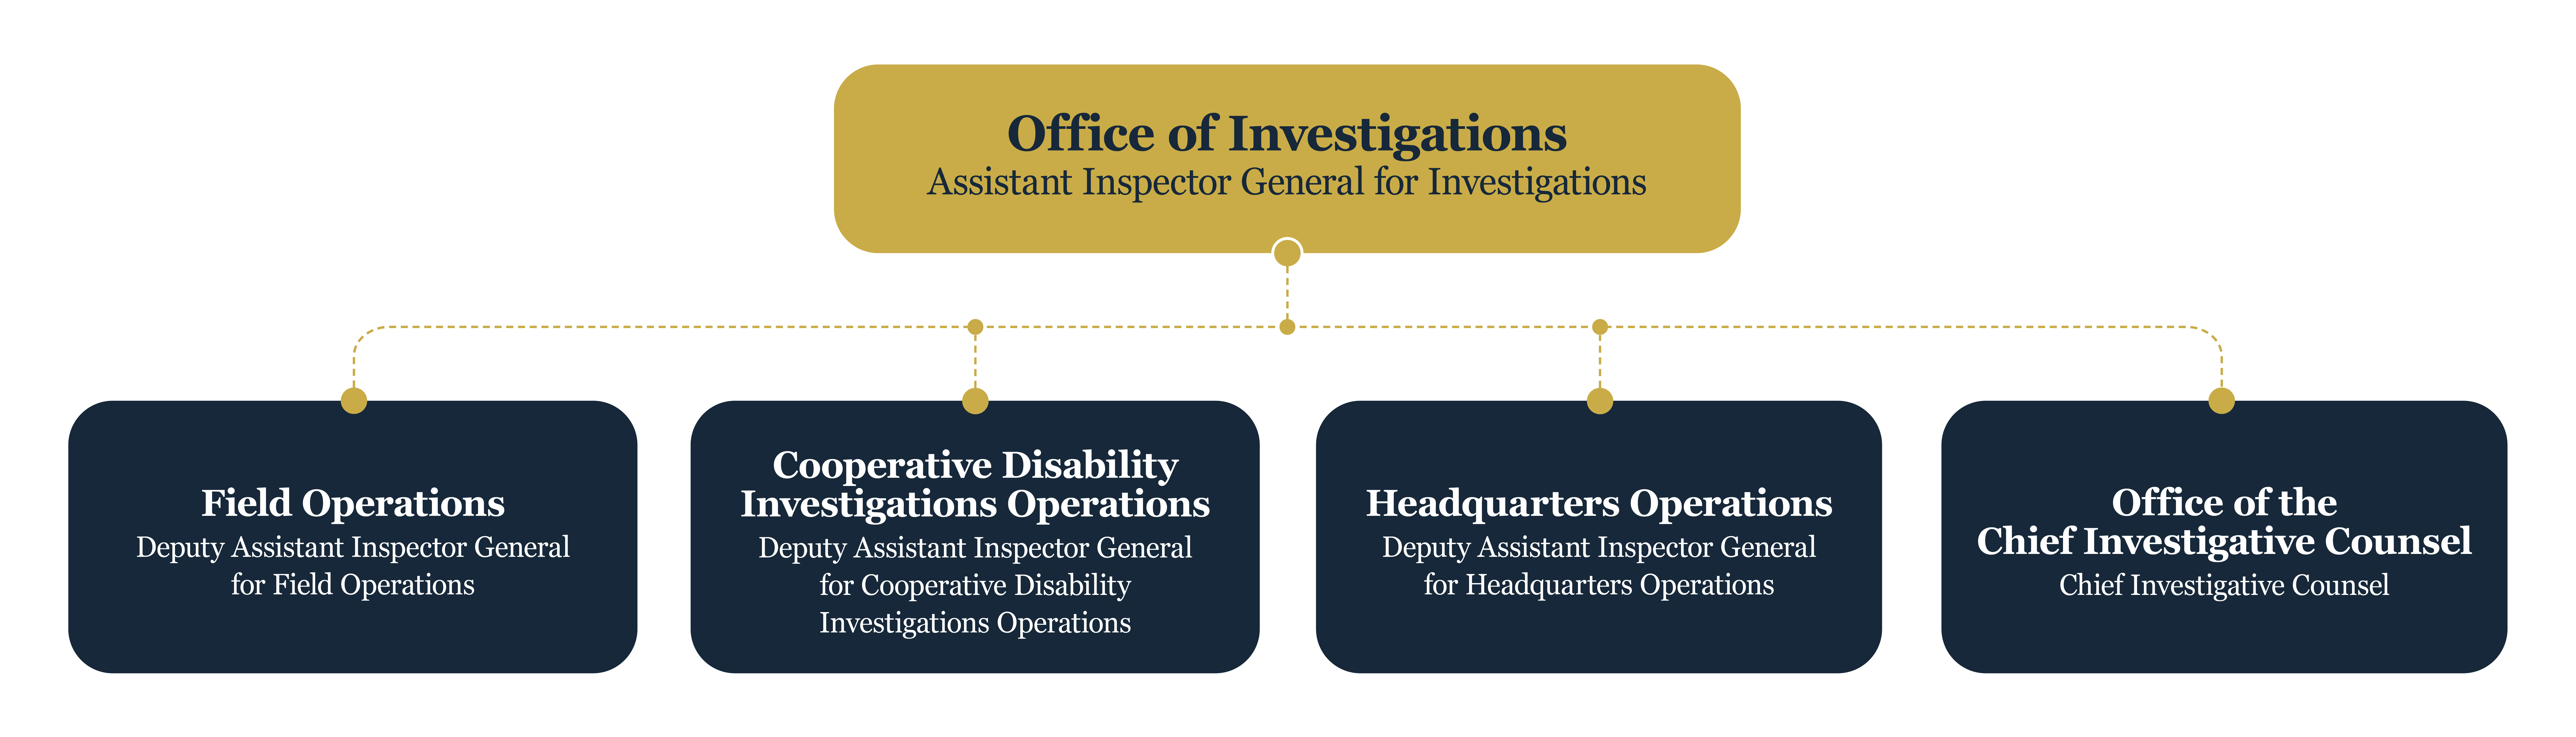 office of investigations